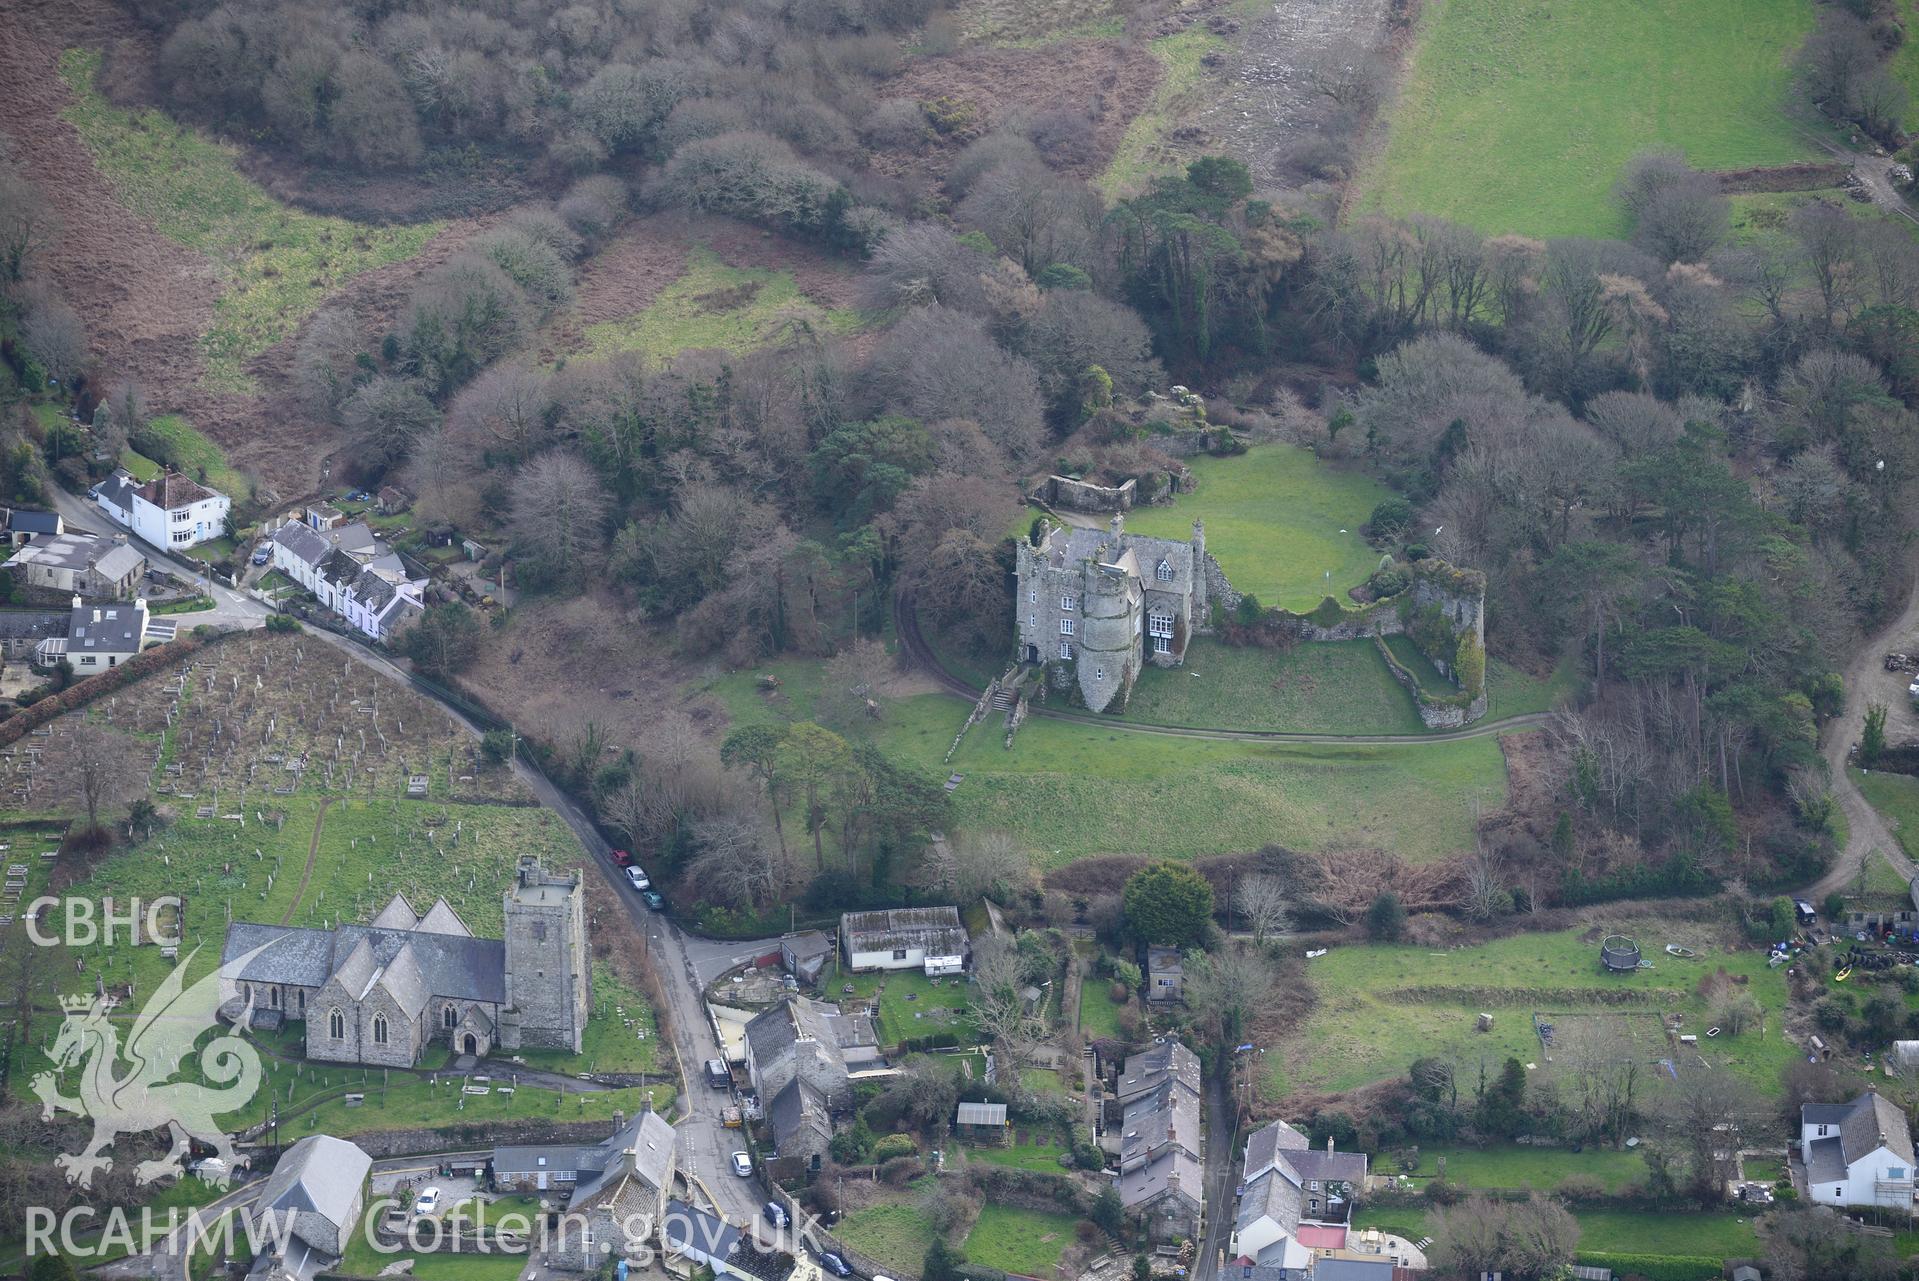 Newport Castle and St. Mary's church, Newport, Pembrokeshire. Oblique aerial photograph taken during the Royal Commission's programme of archaeological aerial reconnaissance by Toby Driver on 13th March 2015.